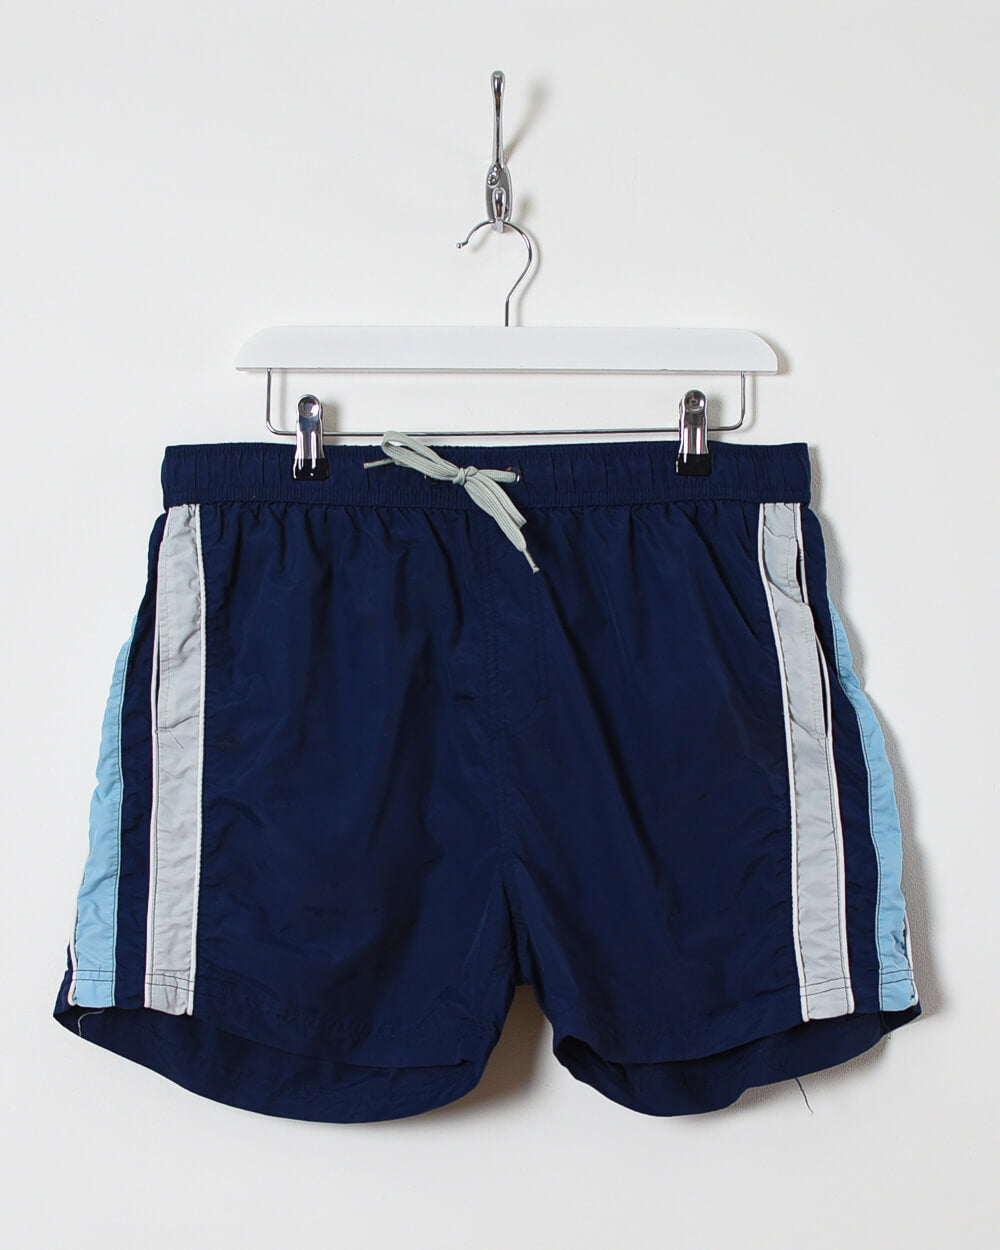 Best Company Swimwear Shorts - W32 - Domno Vintage 90s, 80s, 00s Retro and Vintage Clothing 